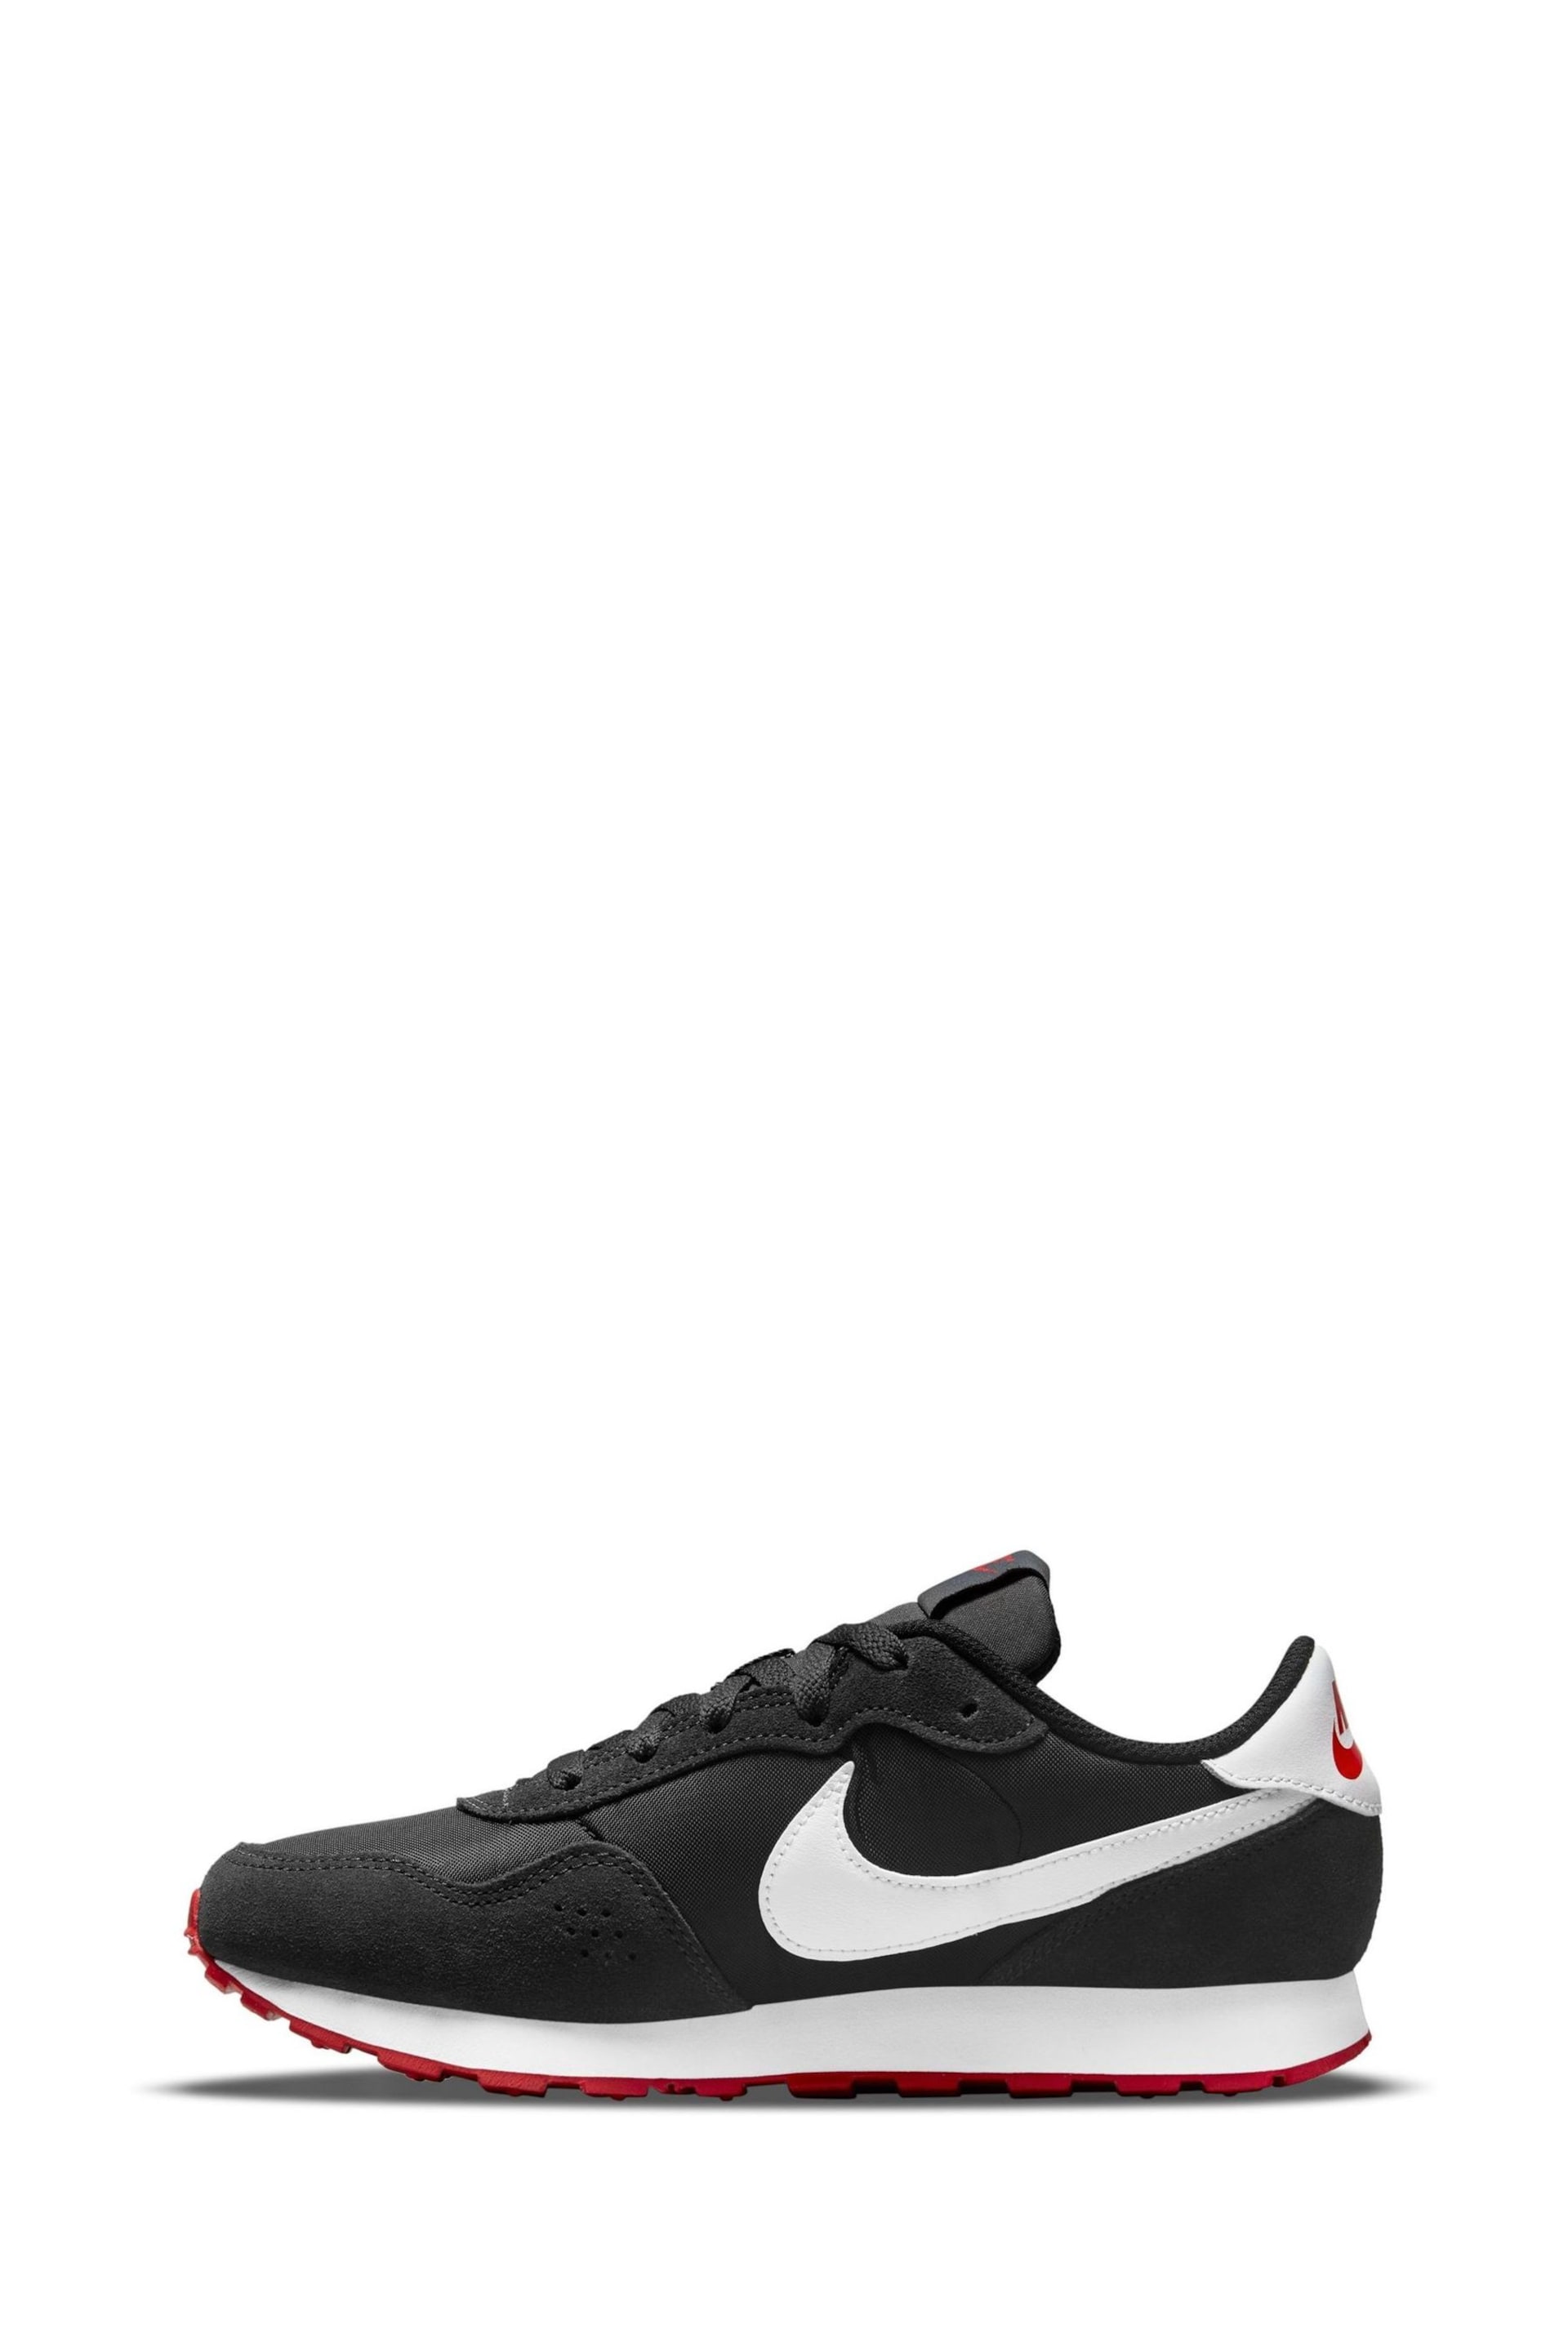 Nike Black/Red Youth MD Valiant Trainers - Image 4 of 10